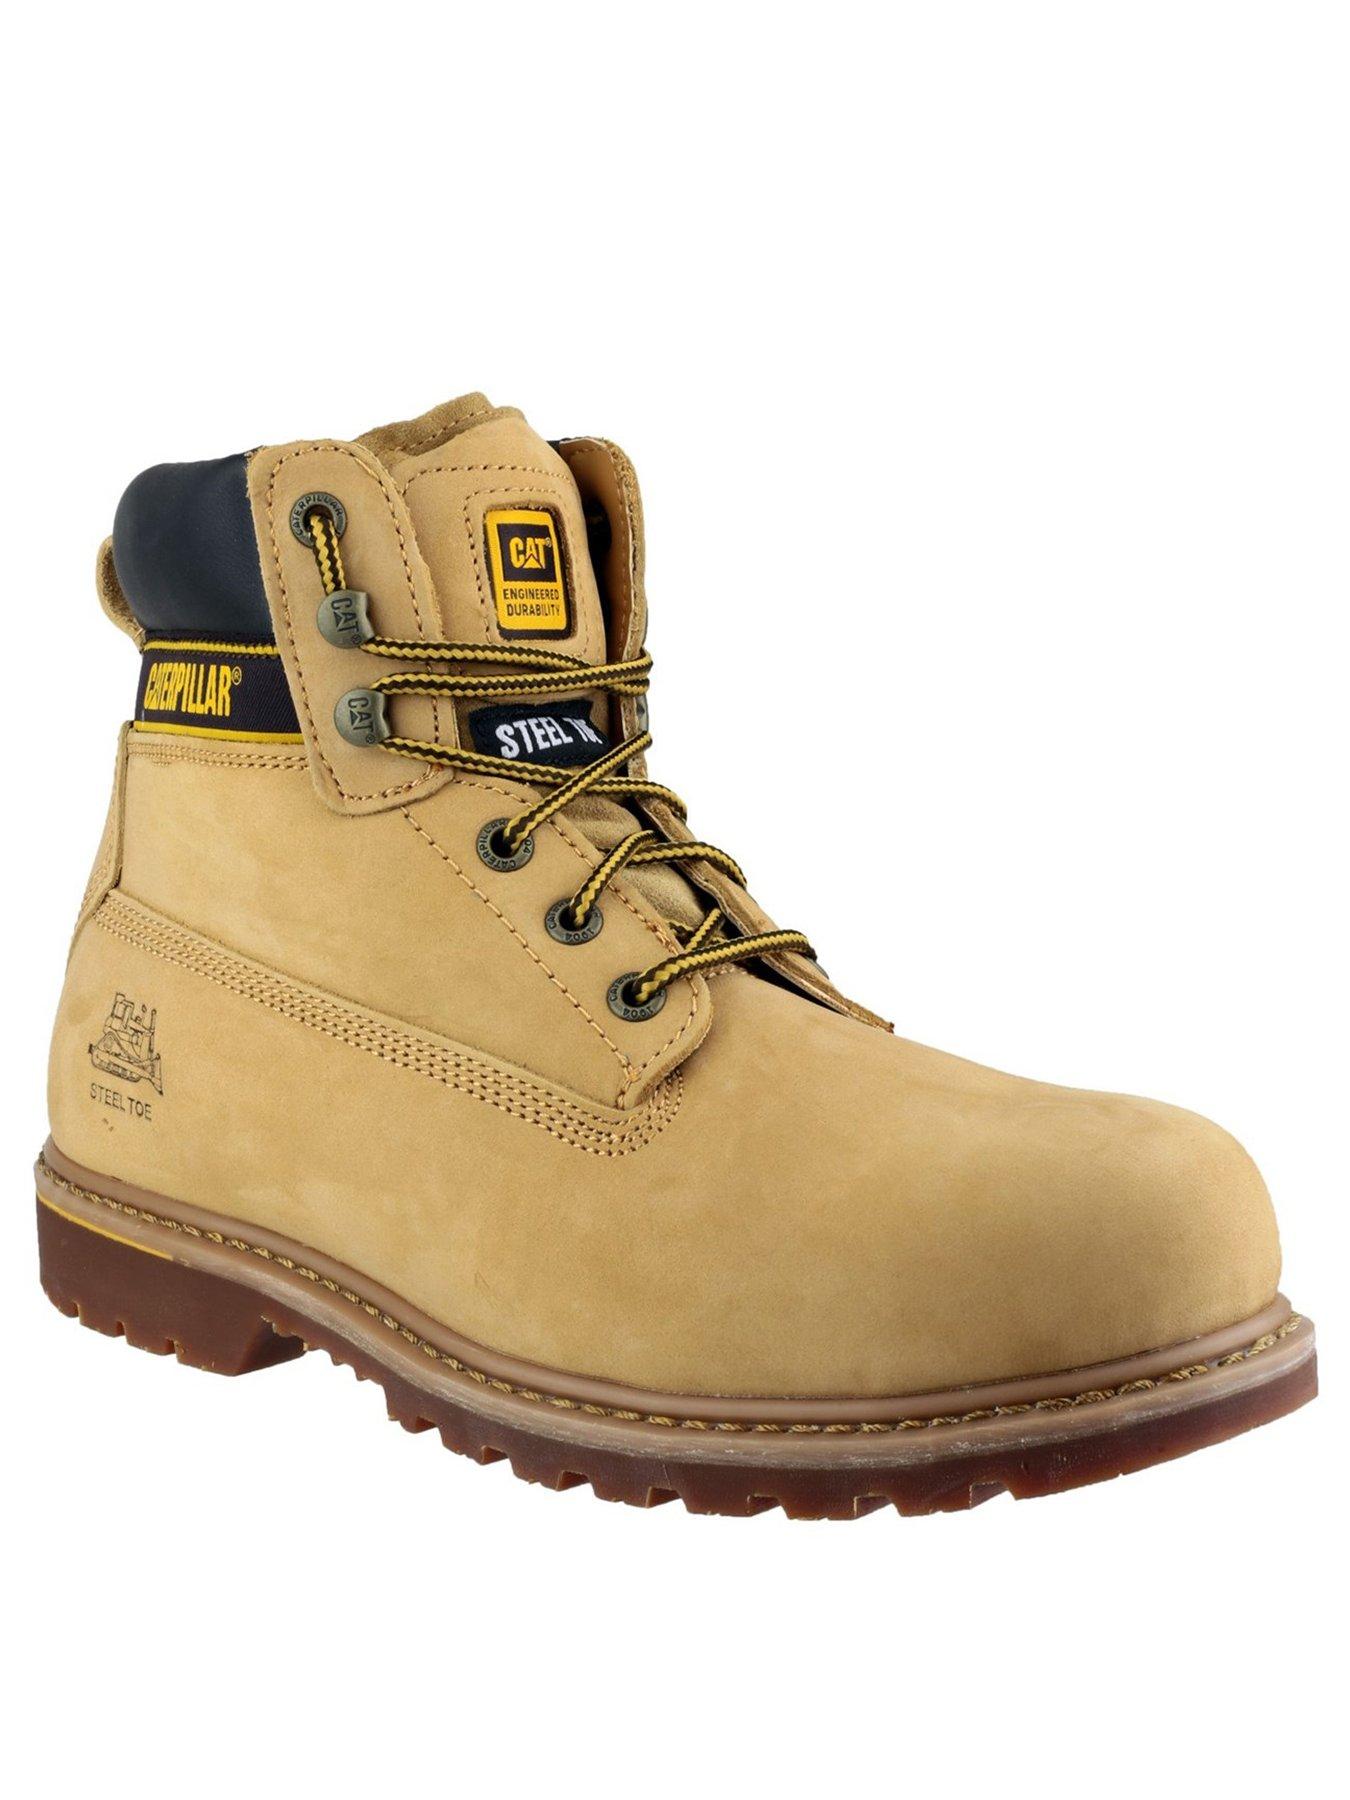 Shoes & boots Cat Holton Safety Boots - Honey